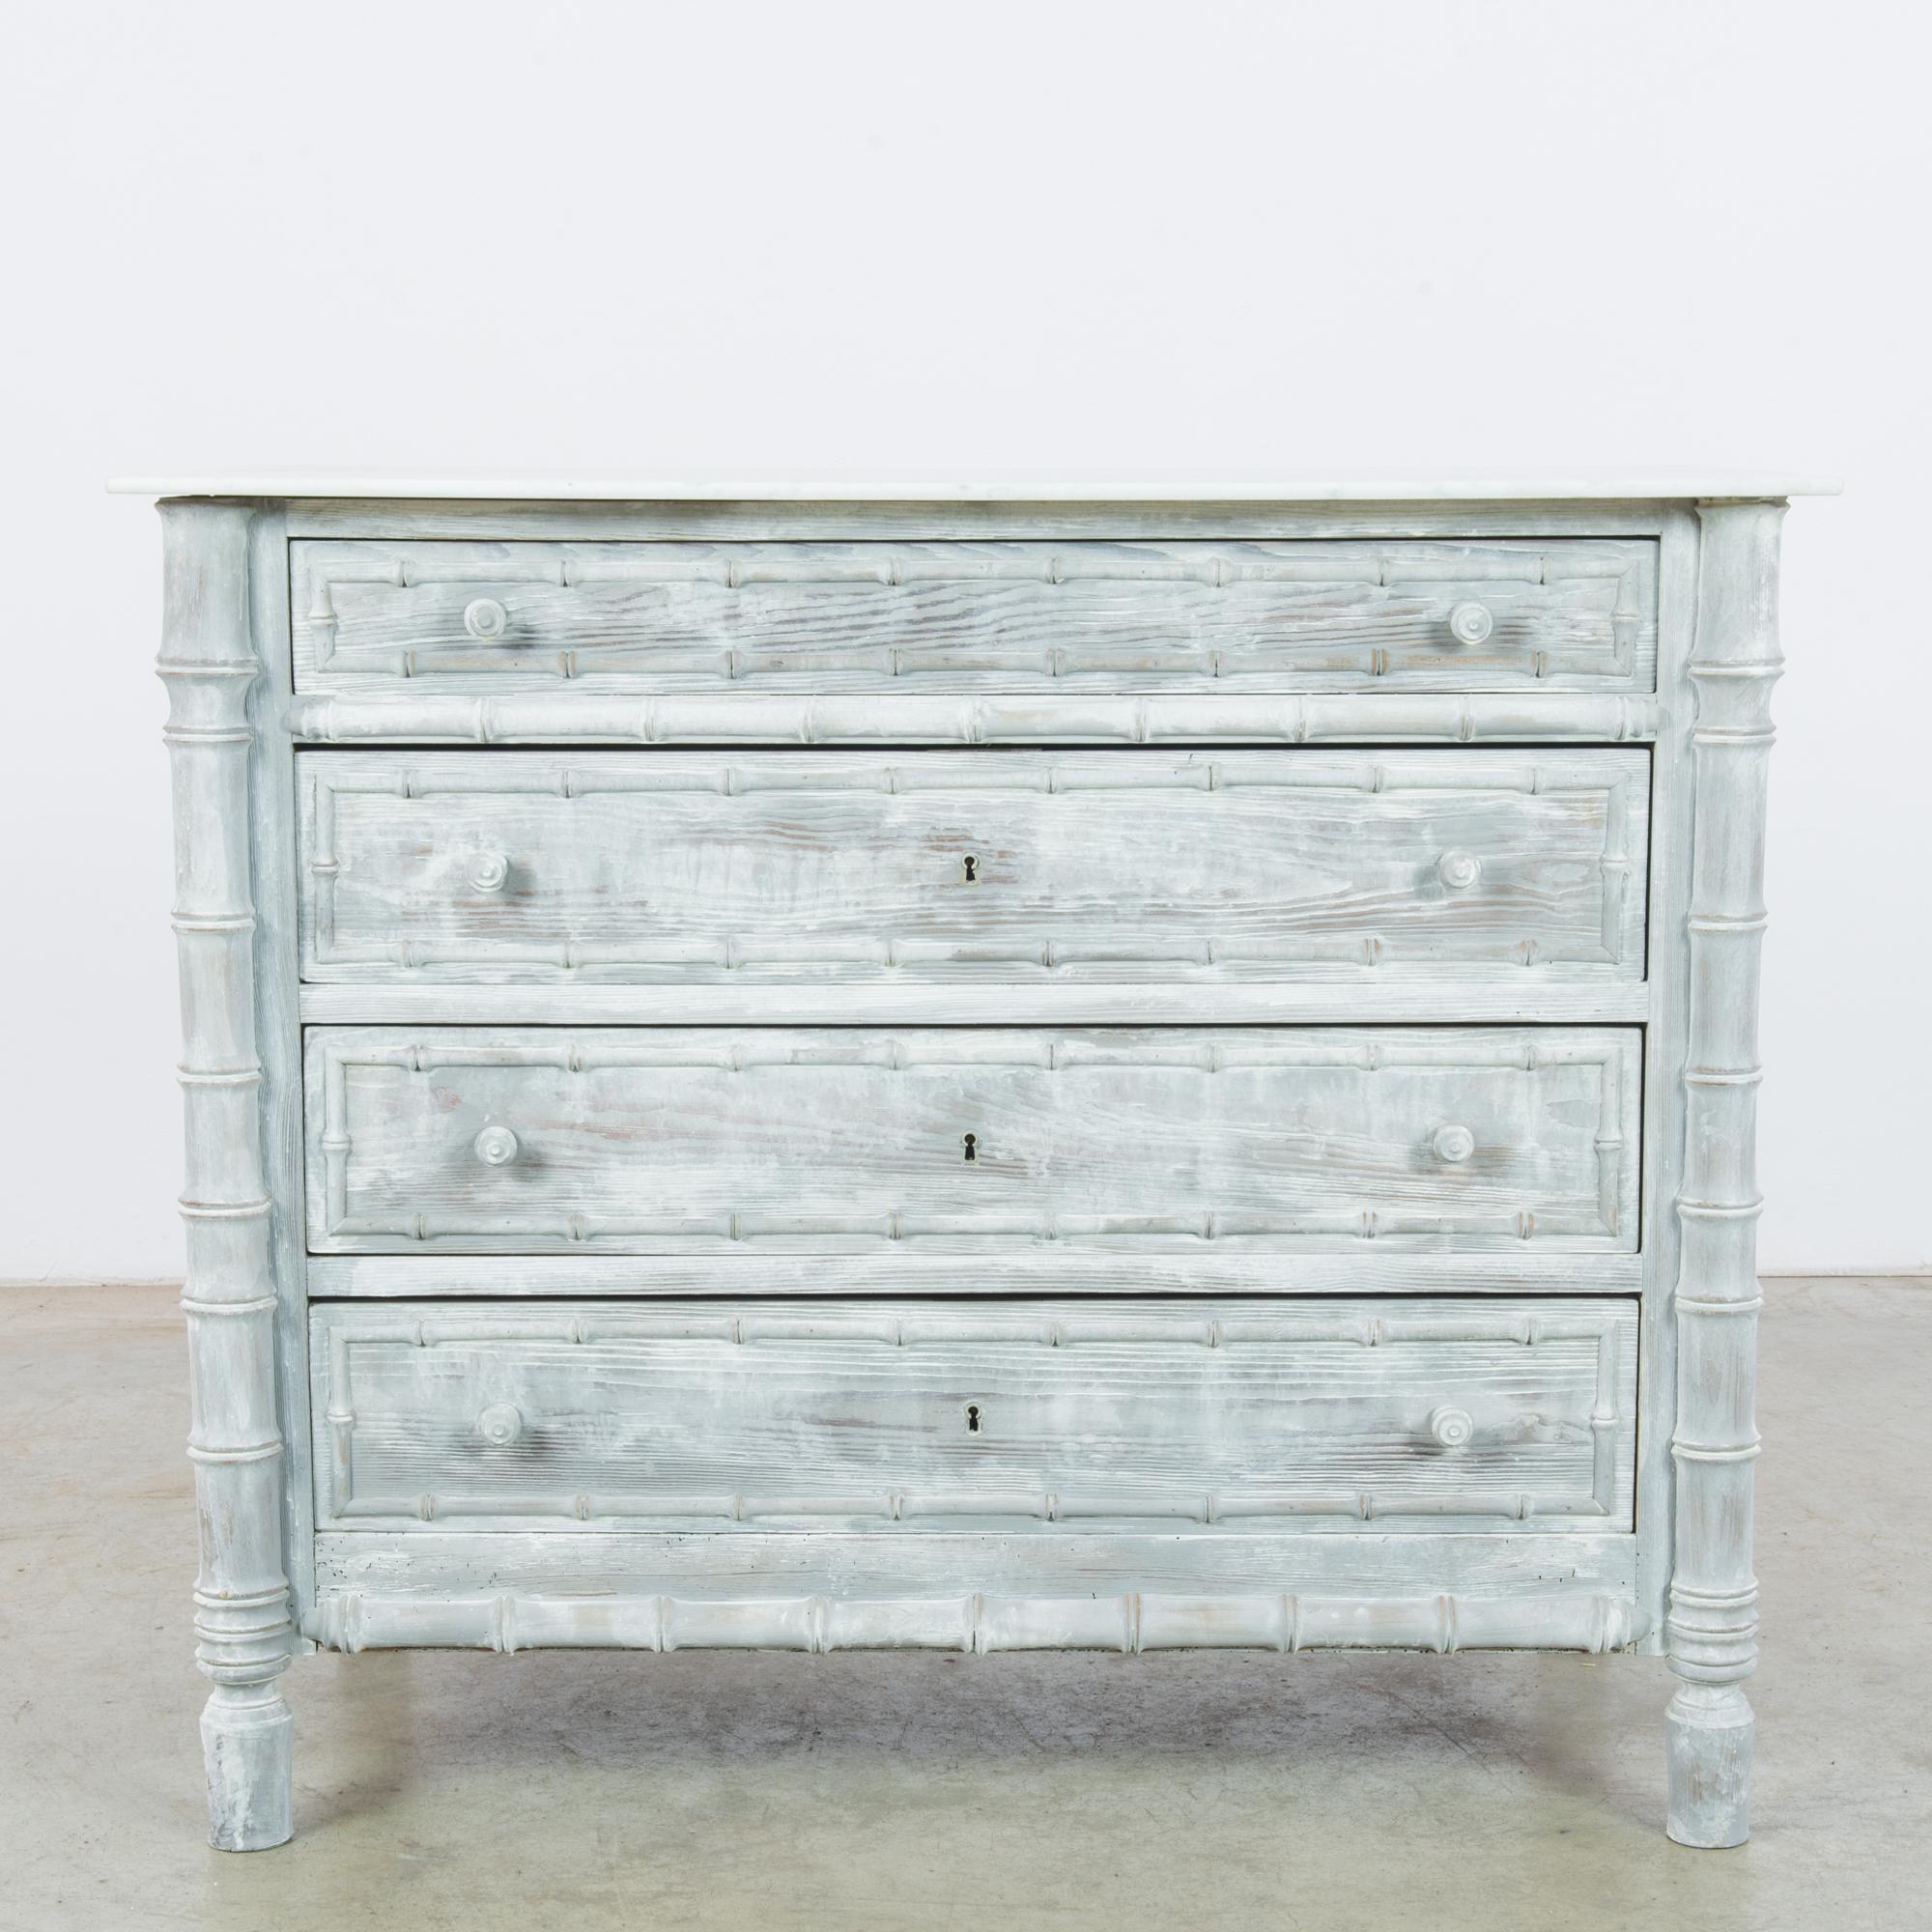 Made in Belgium, the pale teal-gray patina and white marble top of this extraordinary find imparts a calm and rustic touch. The beautifully textured wood grain remains visible, shining through the timeworn paint. The corner columns and drawer